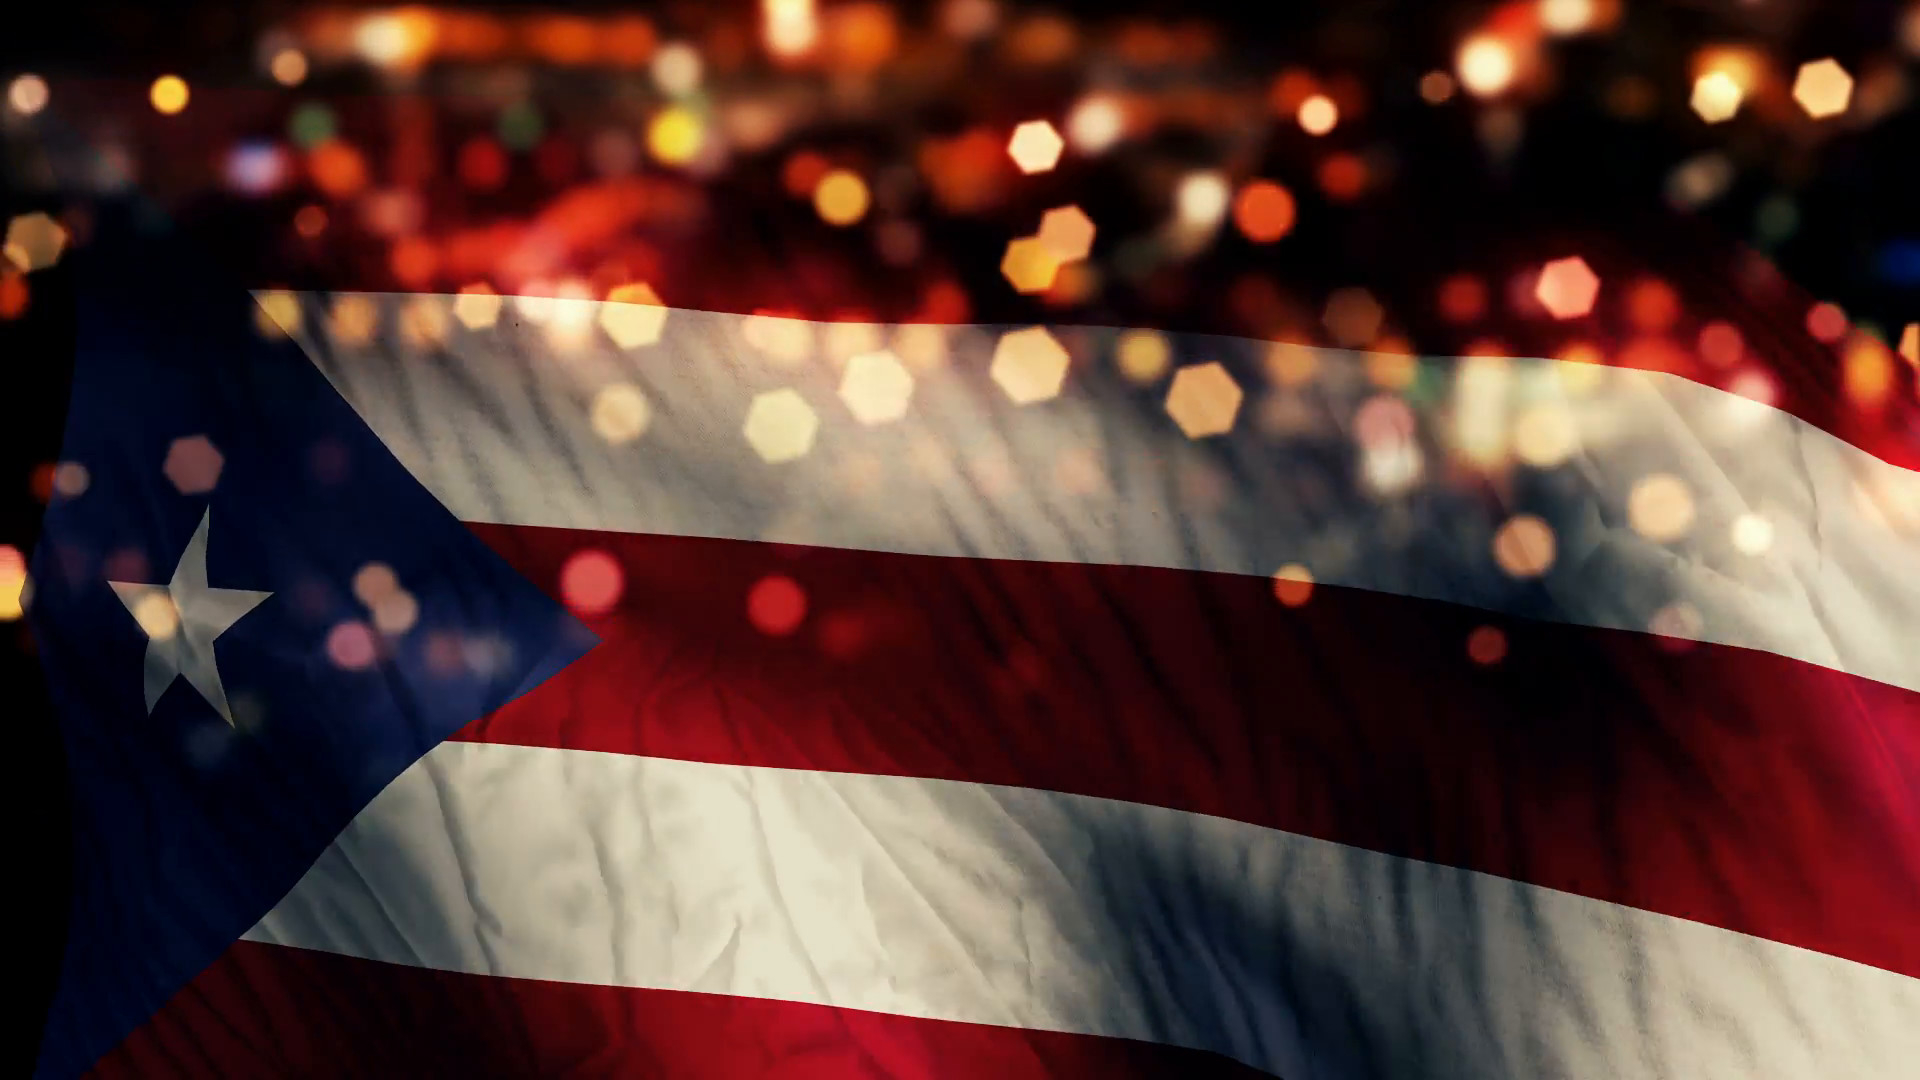 1920x1080 Puerto Rican Flag Wallpaper For Iphone posted by Ethan Anders